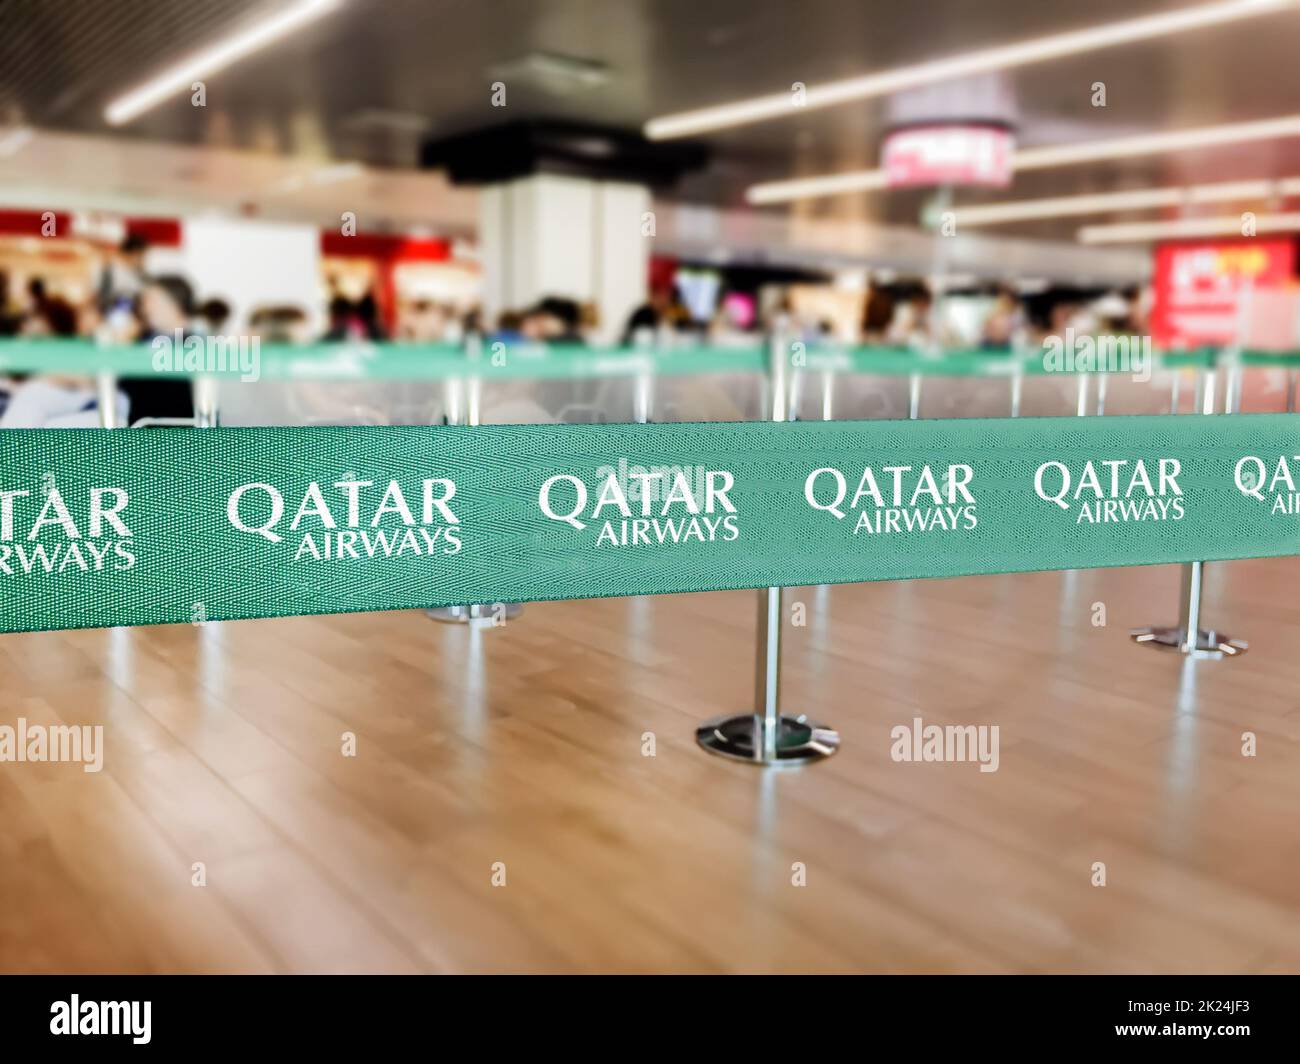 Doha, Qatar, July 2021: Green belt barrier with the Qatar Airways logo. Qatar Airways is the flag carrier airline of Qatar. Travel and airport securit Stock Photo